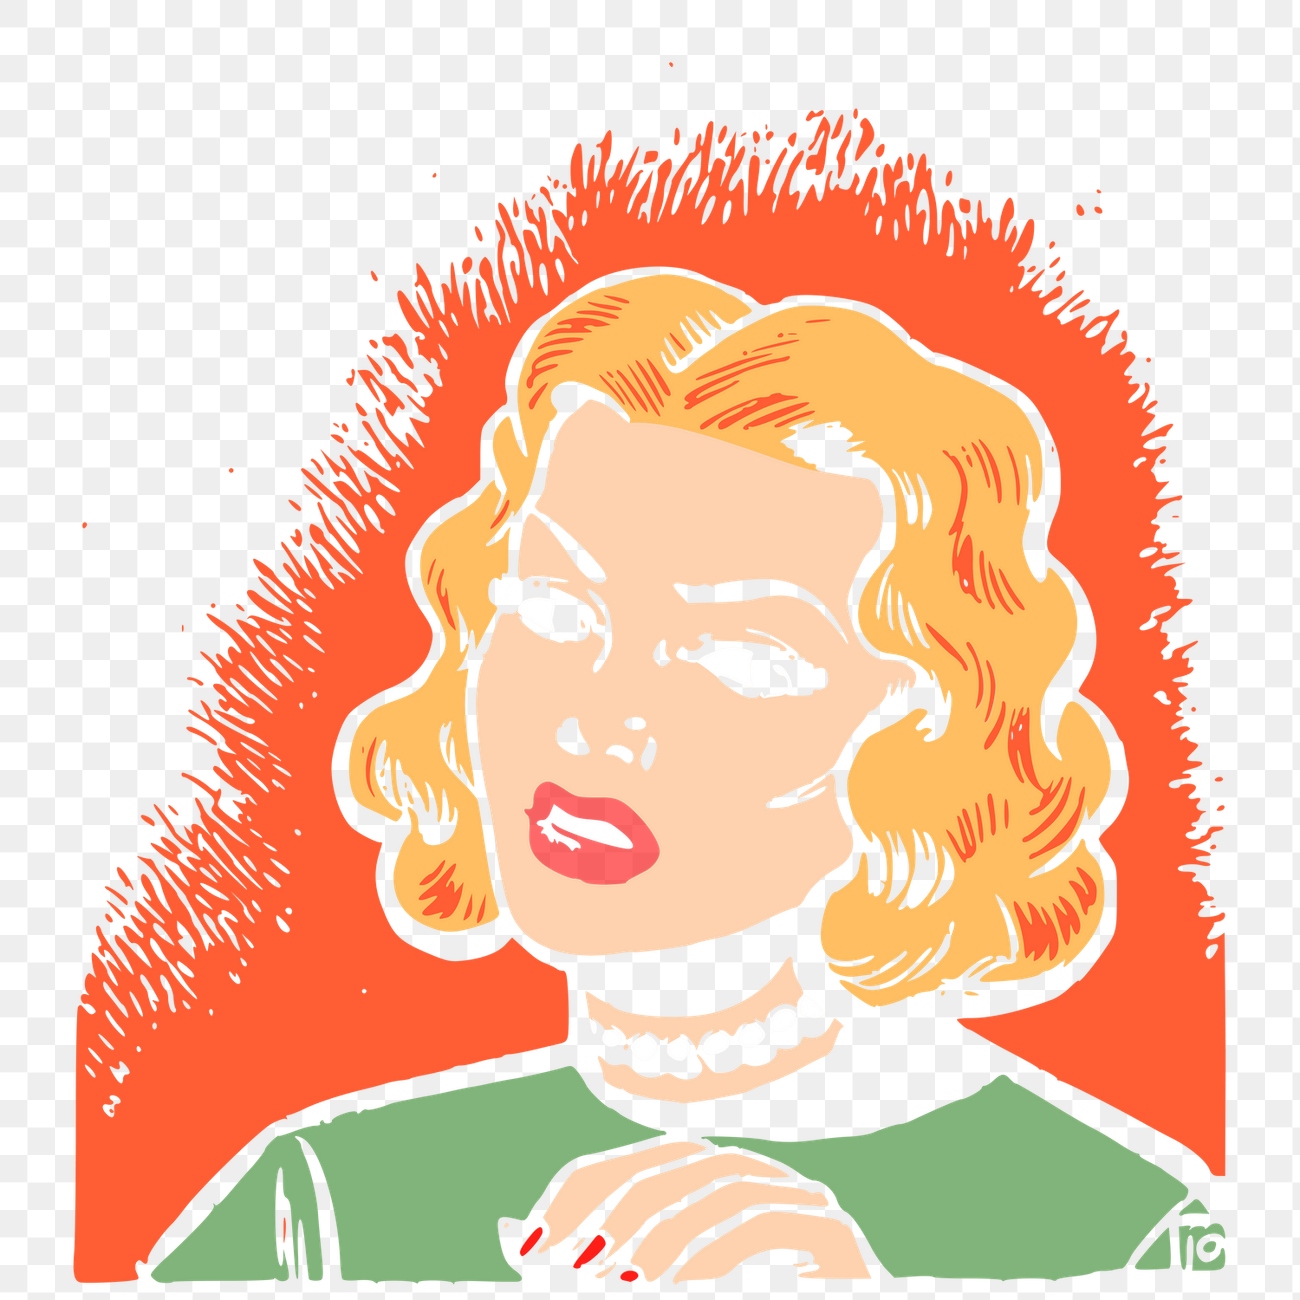 Angry woman png sticker cartoon